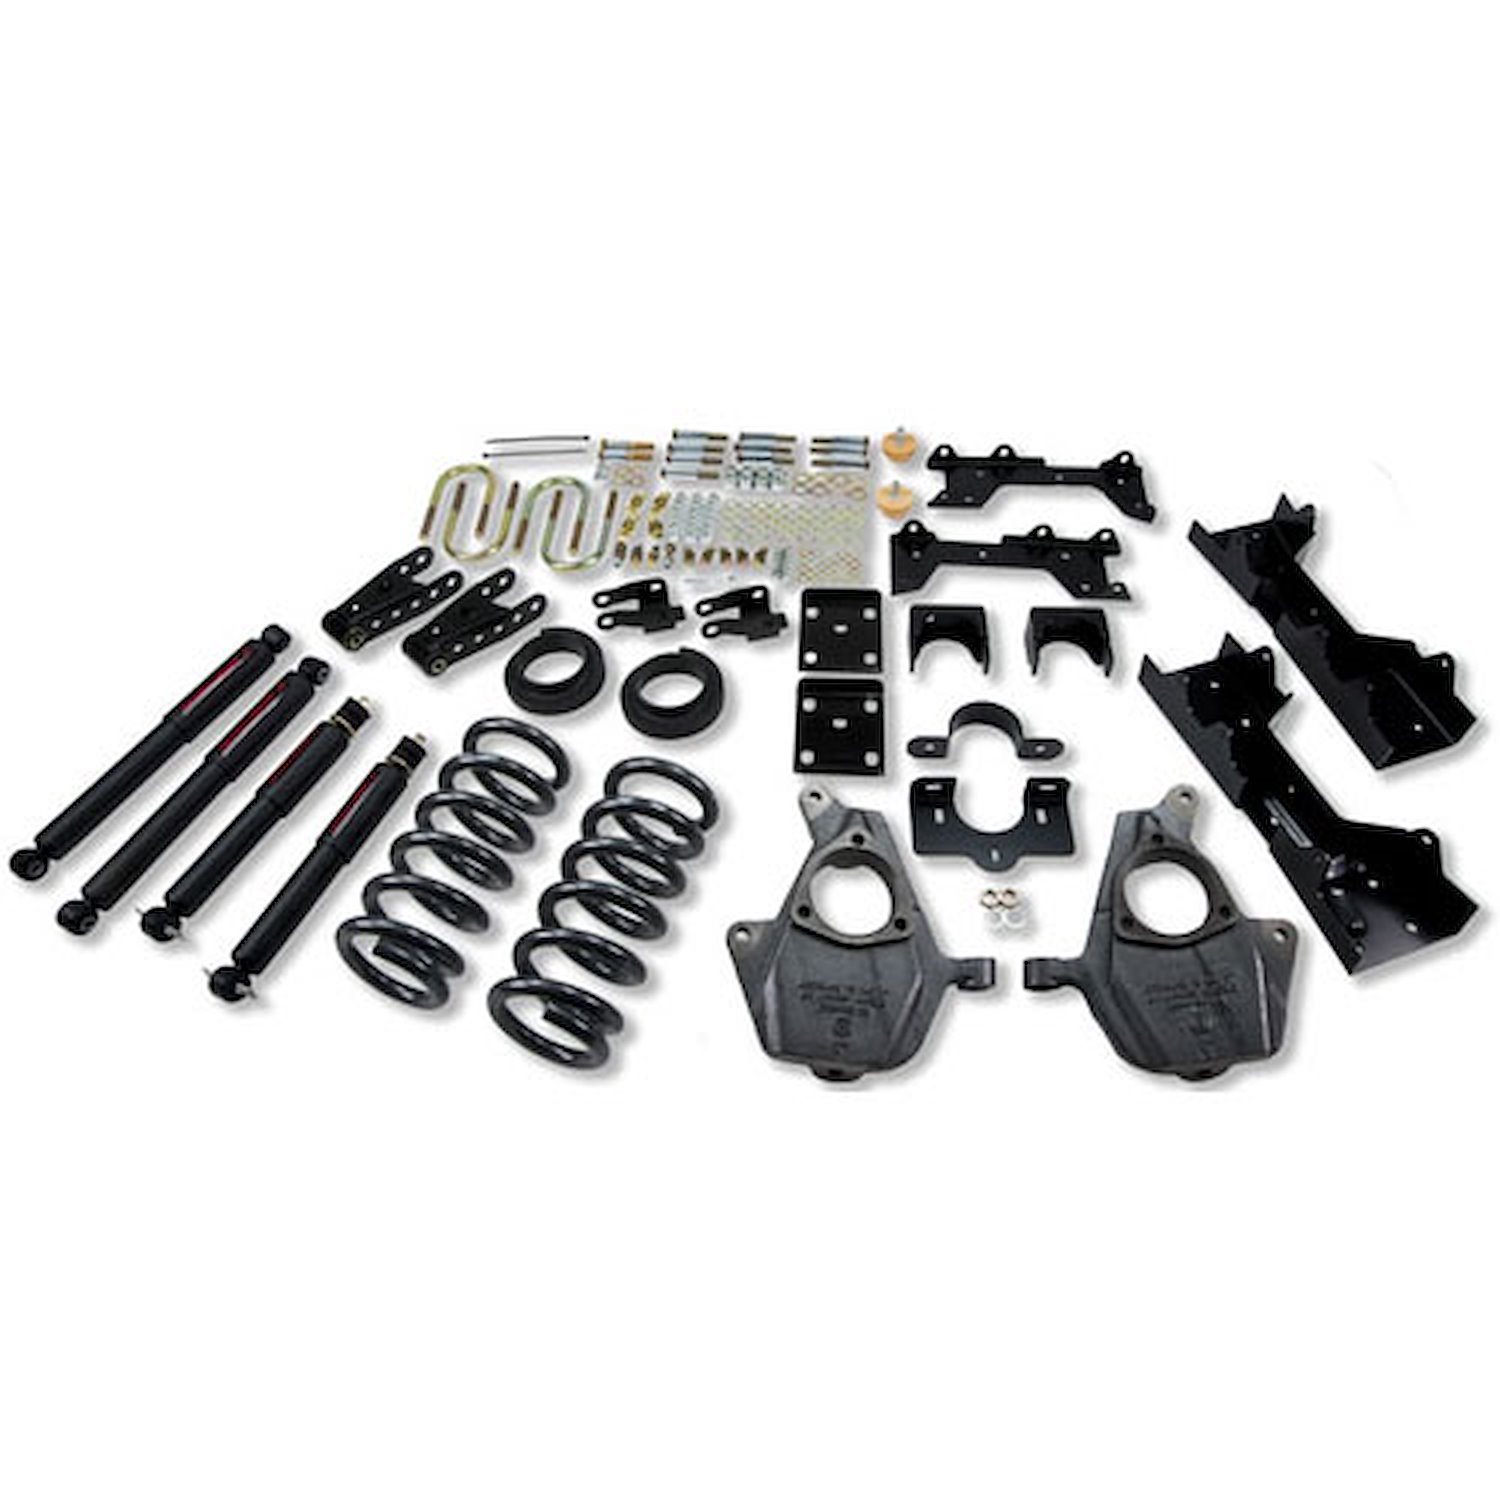 Complete Lowering Kit for 1999-2000 Chevy Silverado/GMC Sierra 1500 Extended Cab